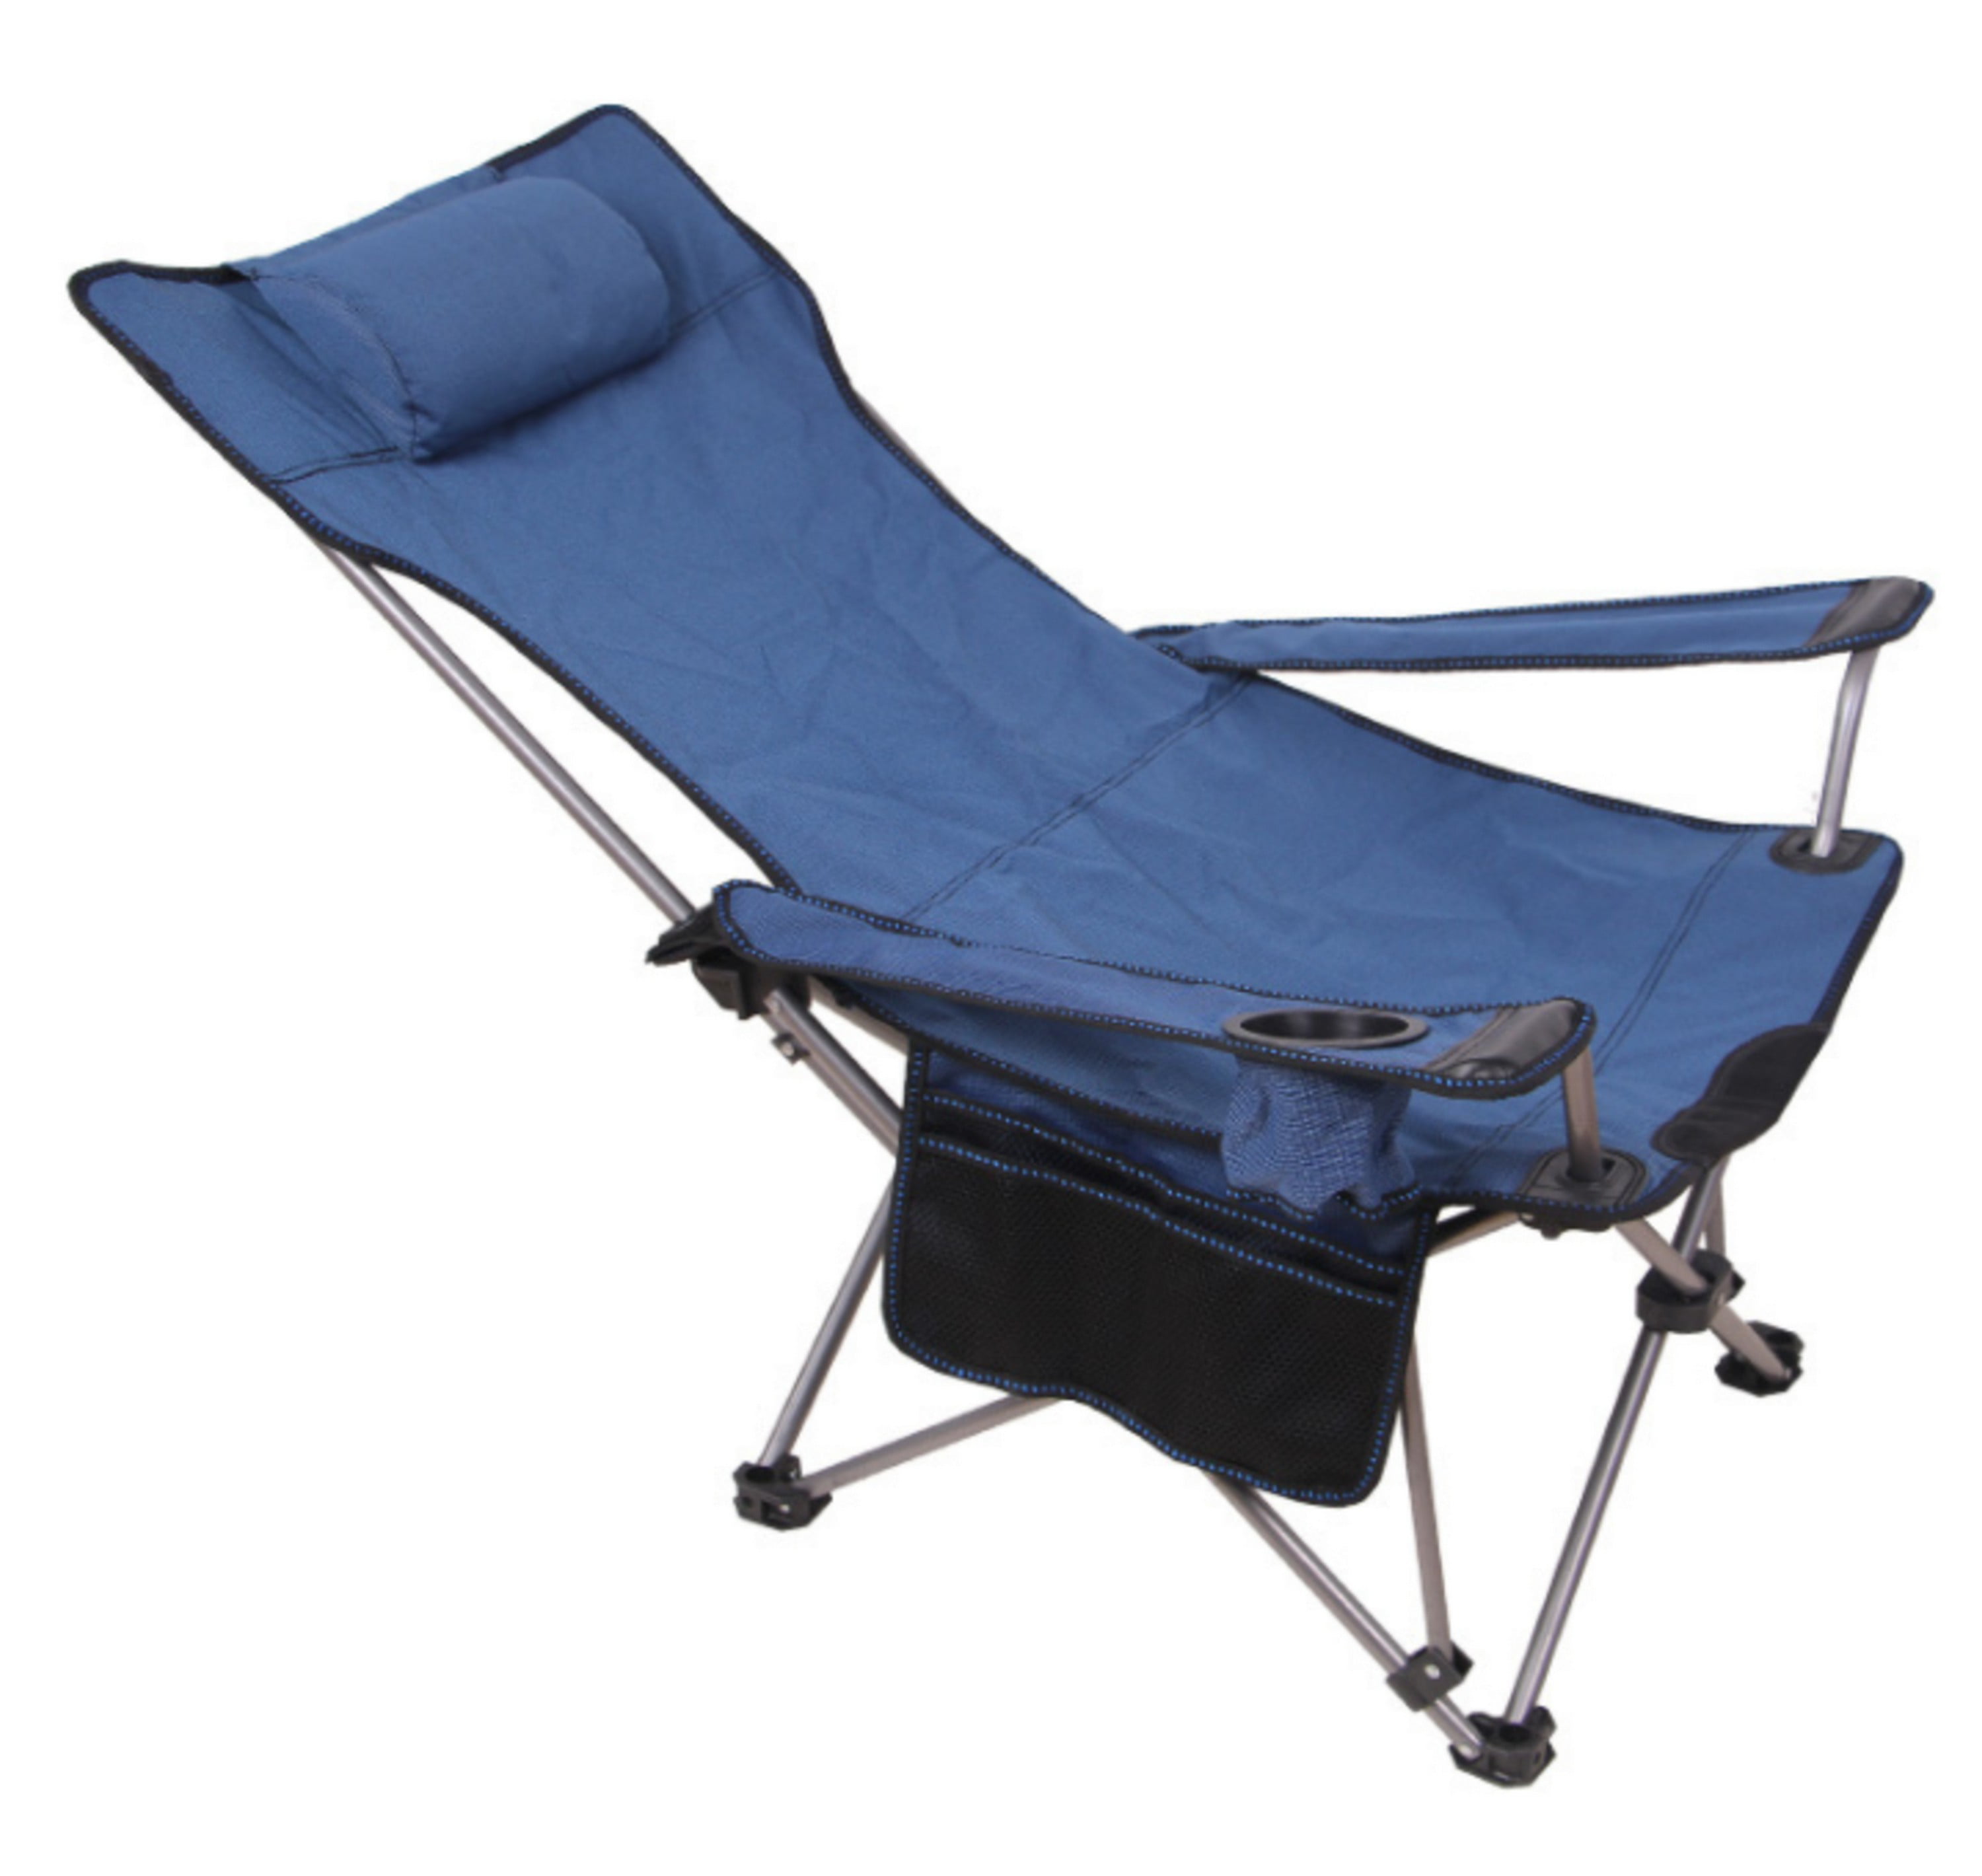 ANIGU Outdoor Mesh Adjustable Camping Folding Chair with Footrest